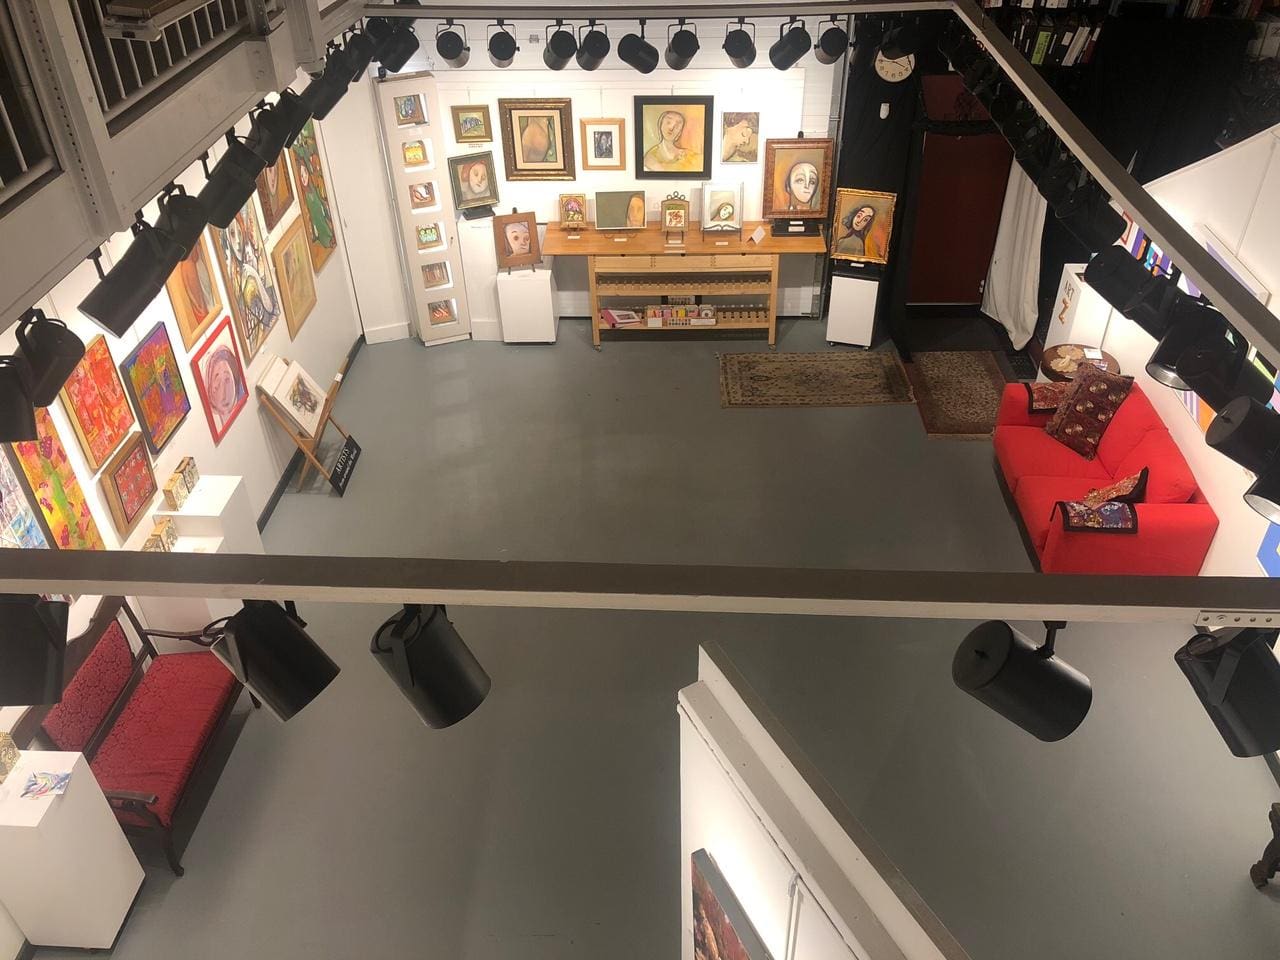 An aerial view of an art gallery with a red couch.